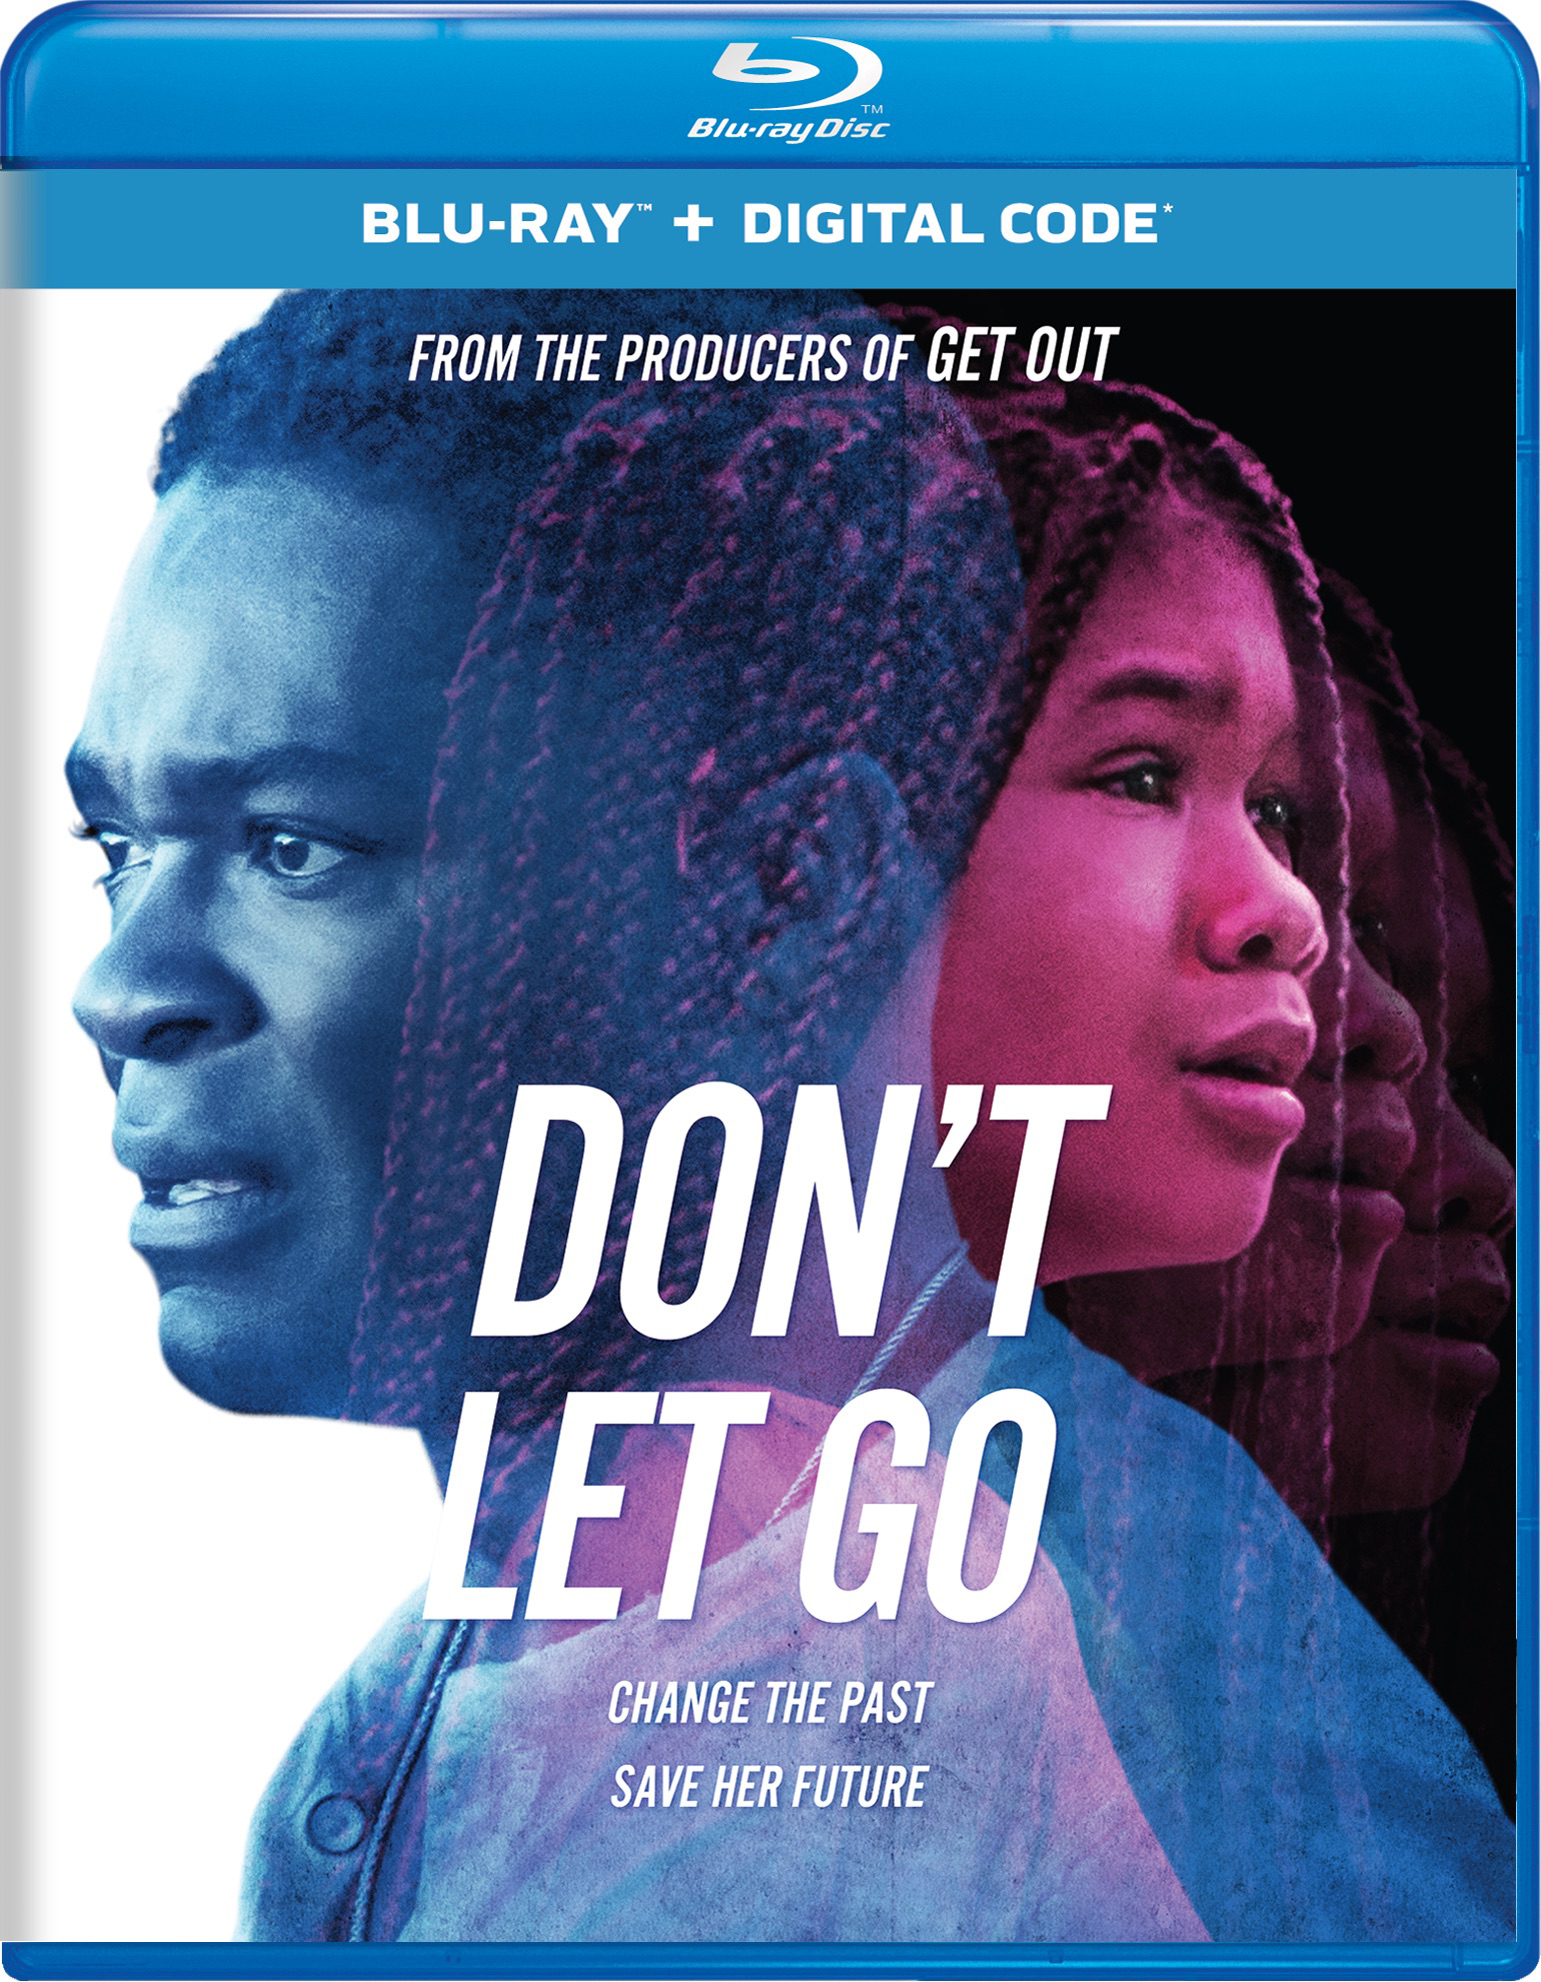 Don't Let Go (Blu-ray + Digital Copy) - Blu-ray [ 2019 ]  - Horror Movies On Blu-ray - Movies On GRUV